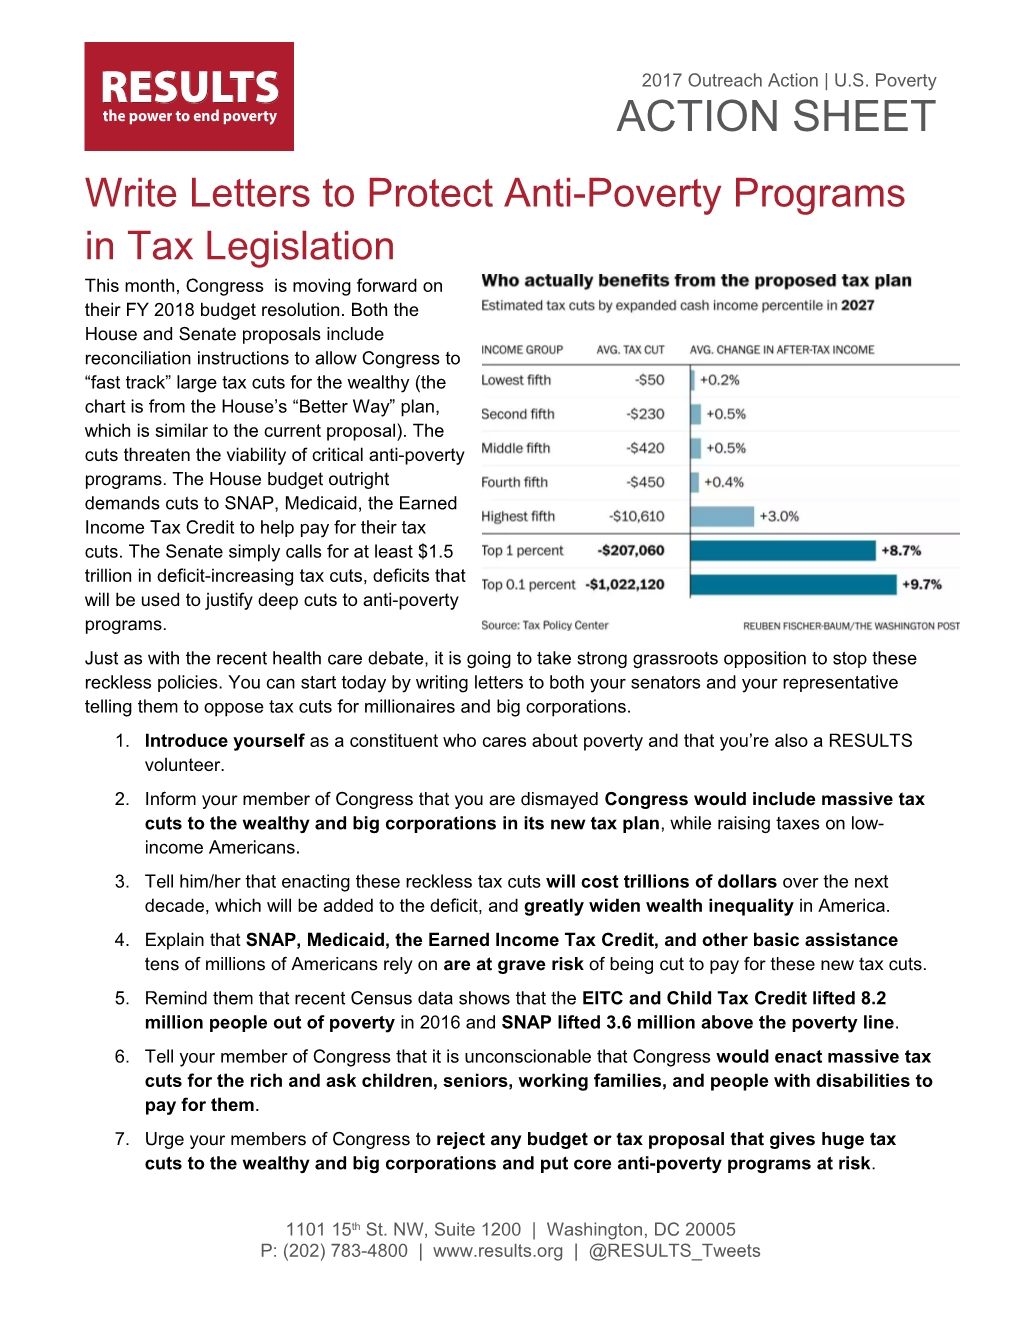 Write Letters to Protect Anti-Poverty Programs in Tax Legislation